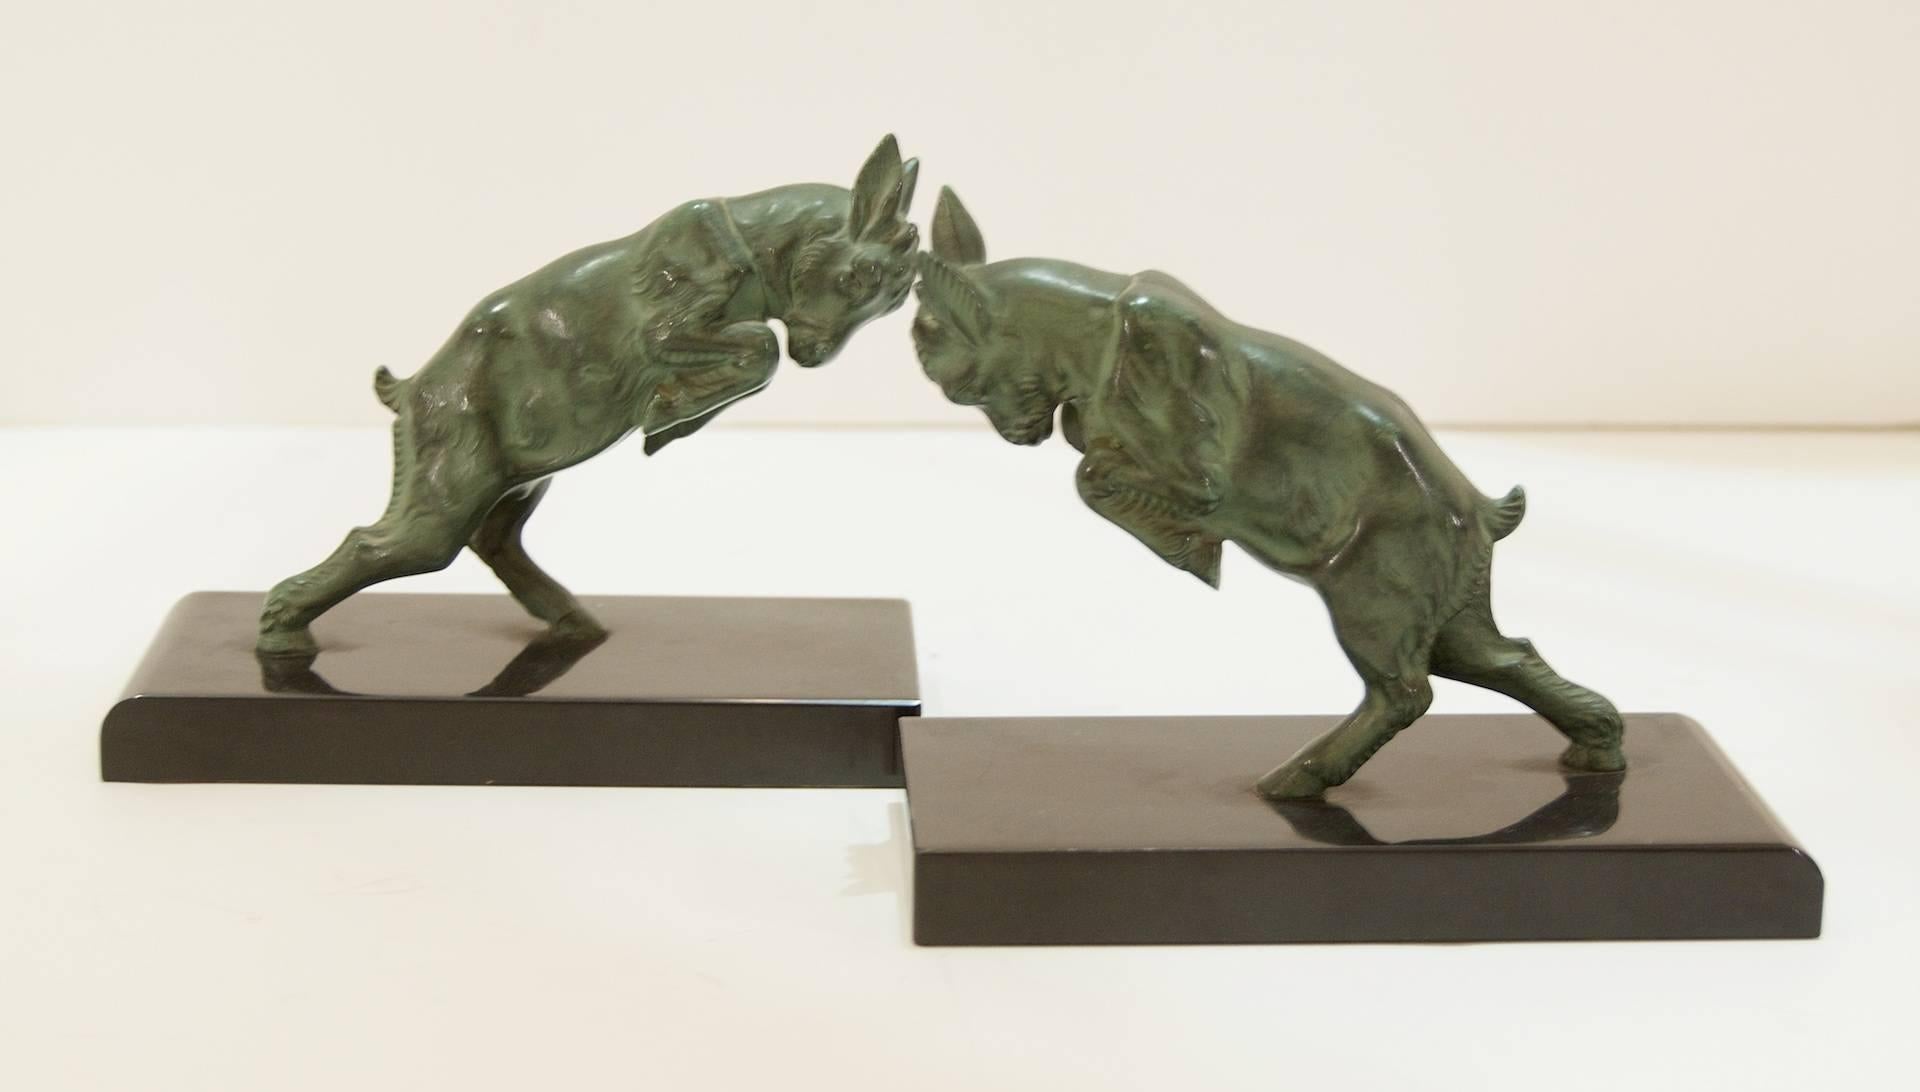 Excellent pair of early 20th century bronze on marble bookends in the form of two leaping or butting head ibexes.